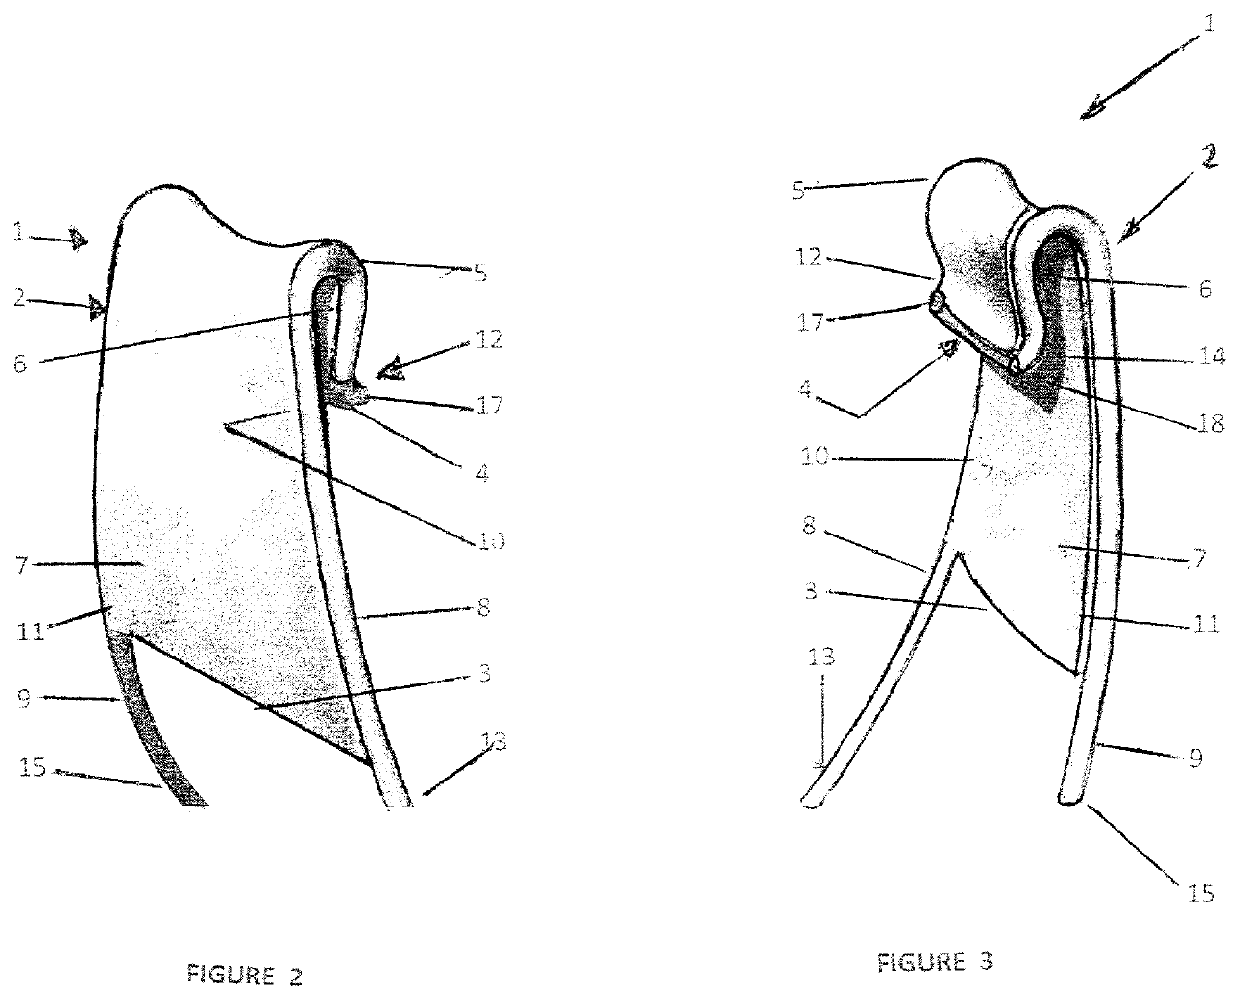 Protective device for use in oral surgical procedures